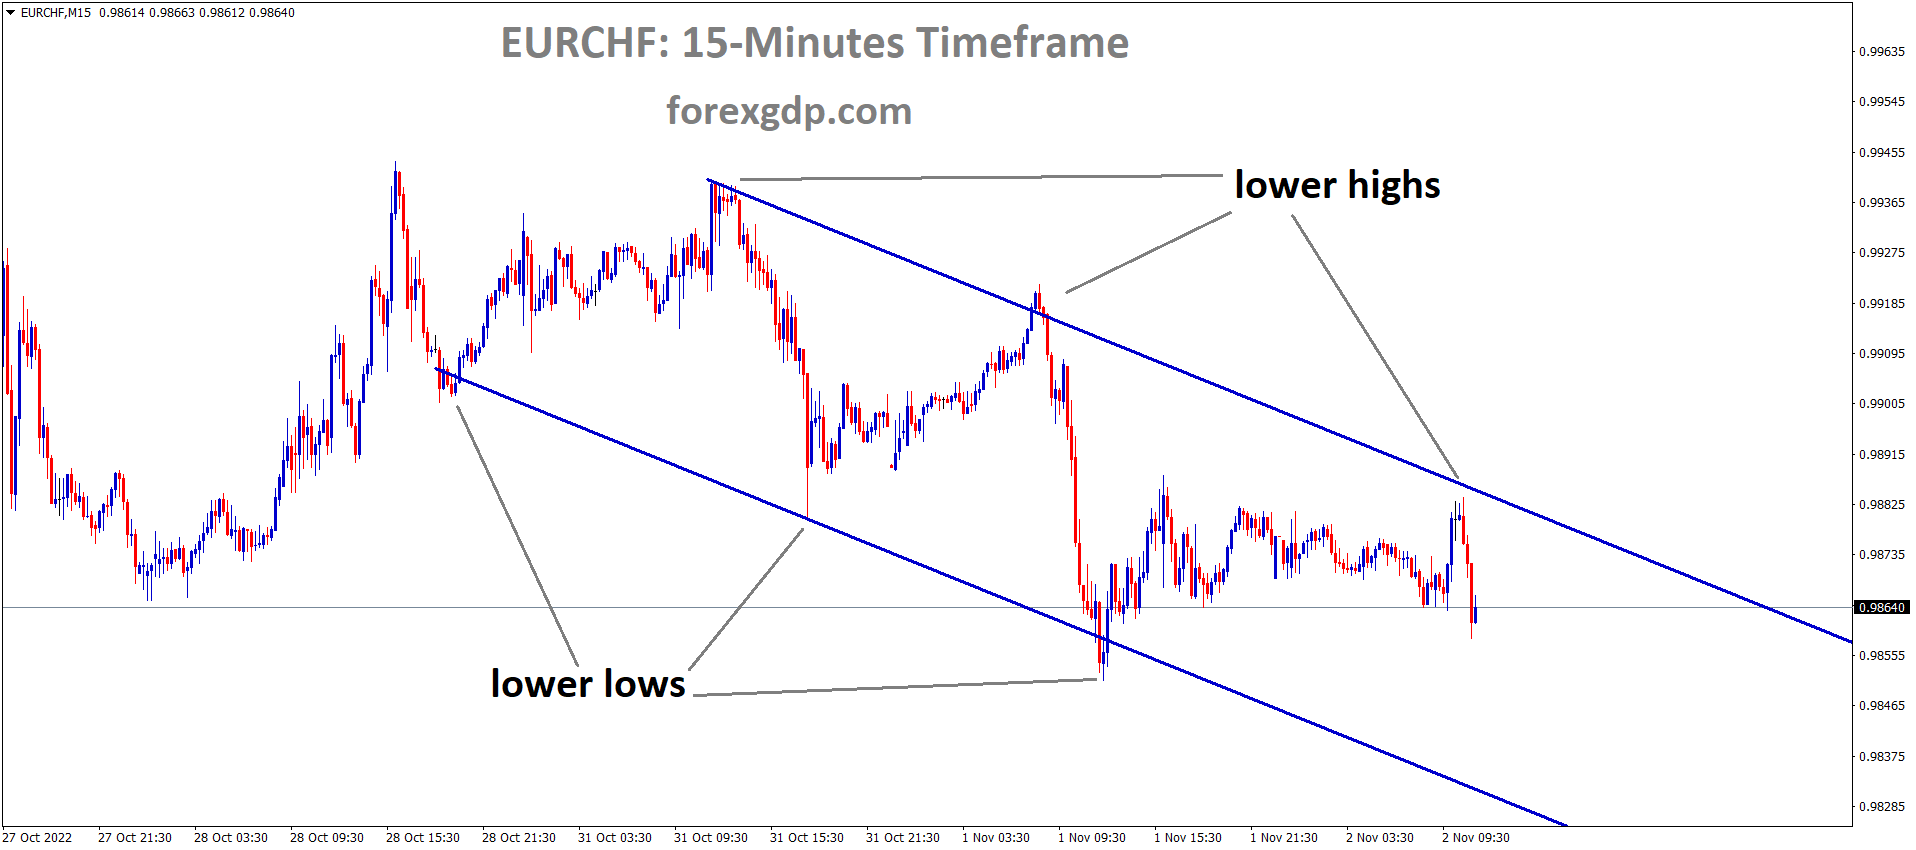 EURCHF is moving in the Descending channel and the market has fallen from the lower high area of the channel1